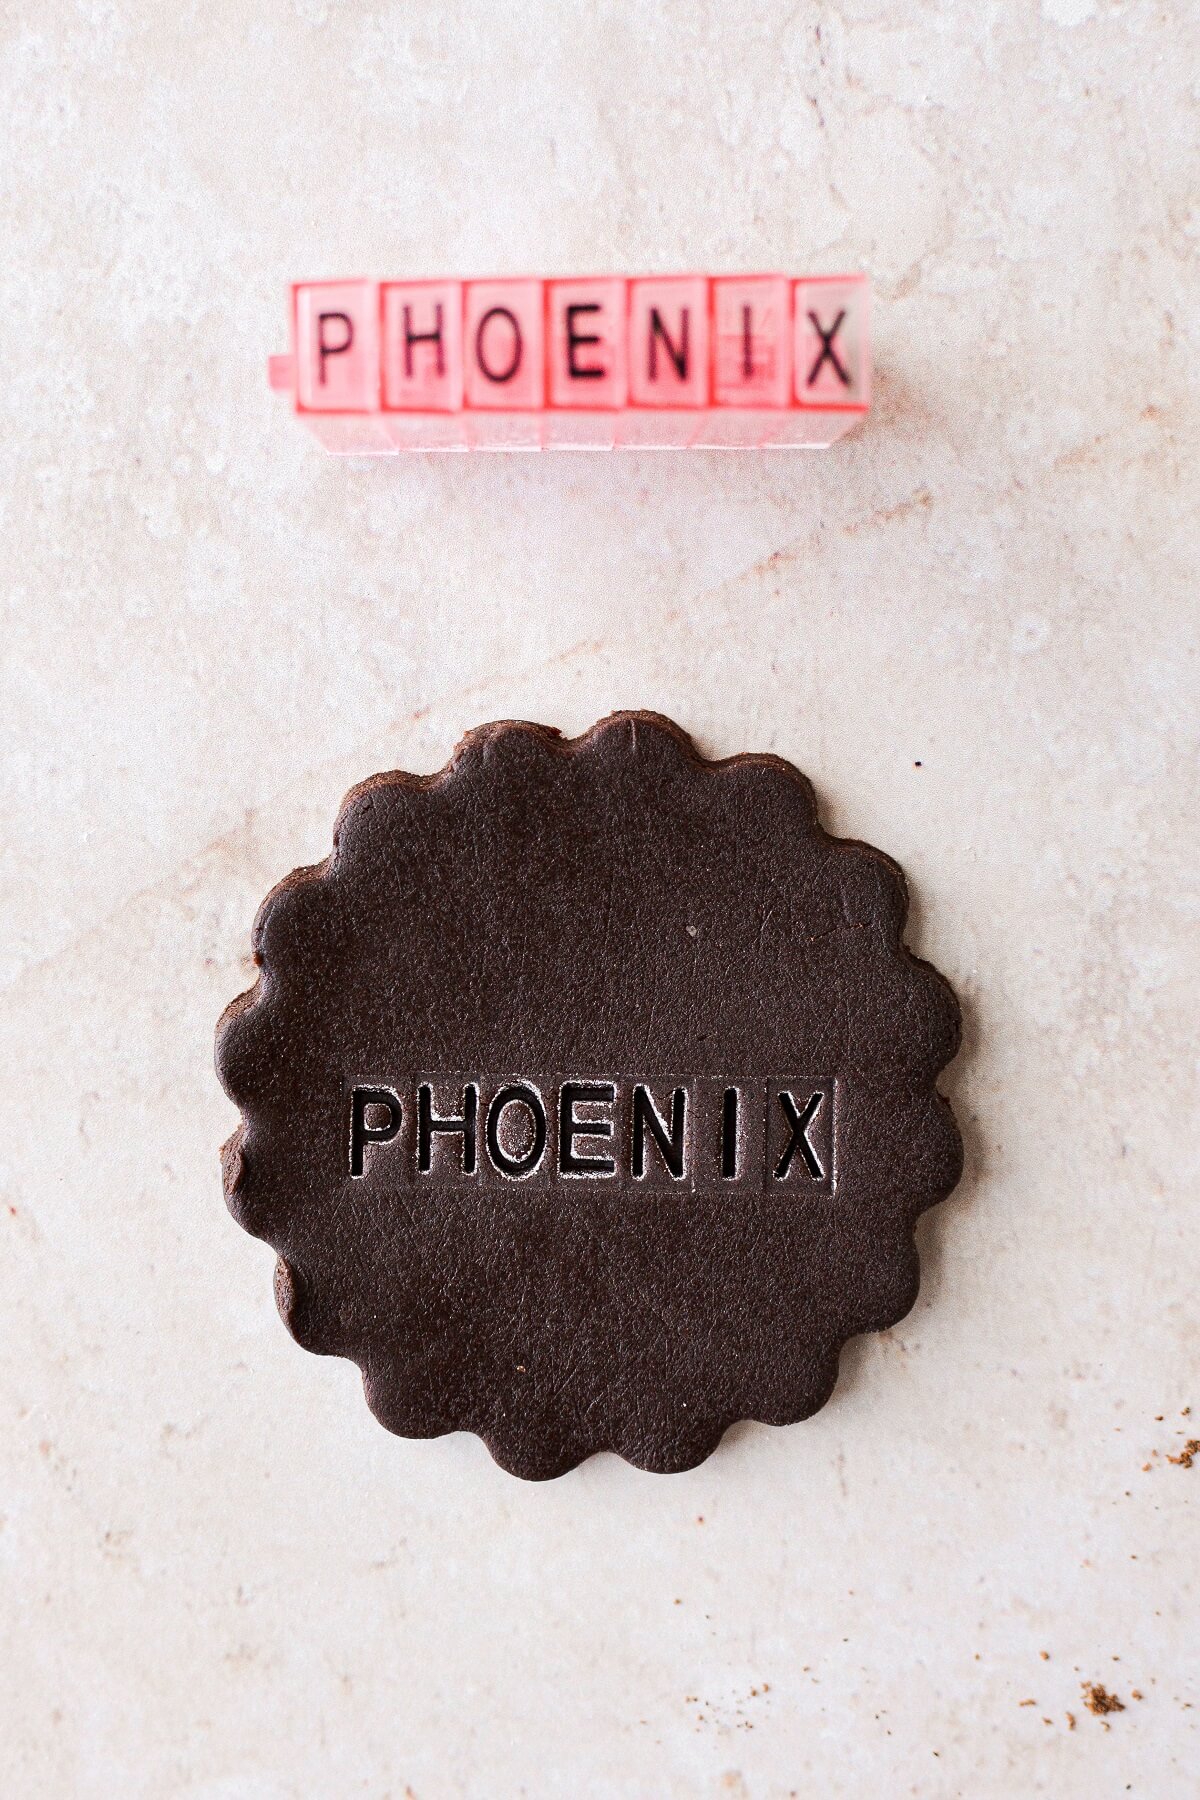 A chocolate cookie stamped with the name "Phoenix".